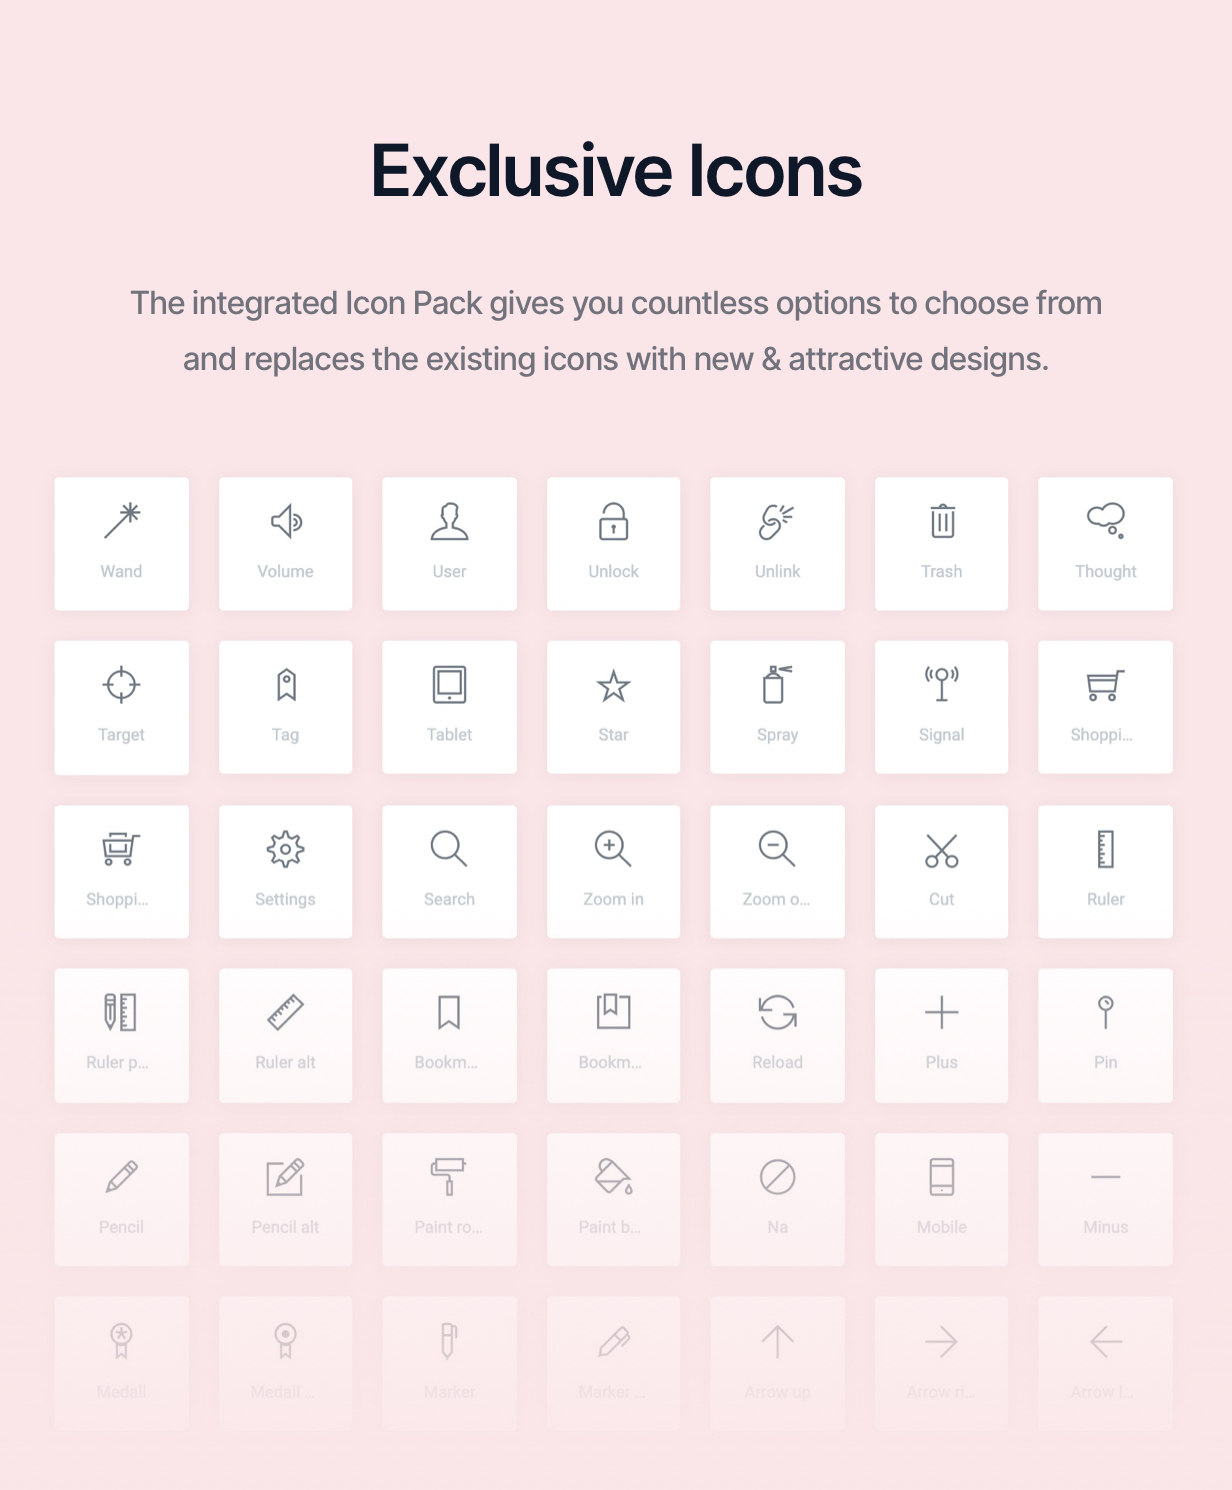 Exclusive icons included.